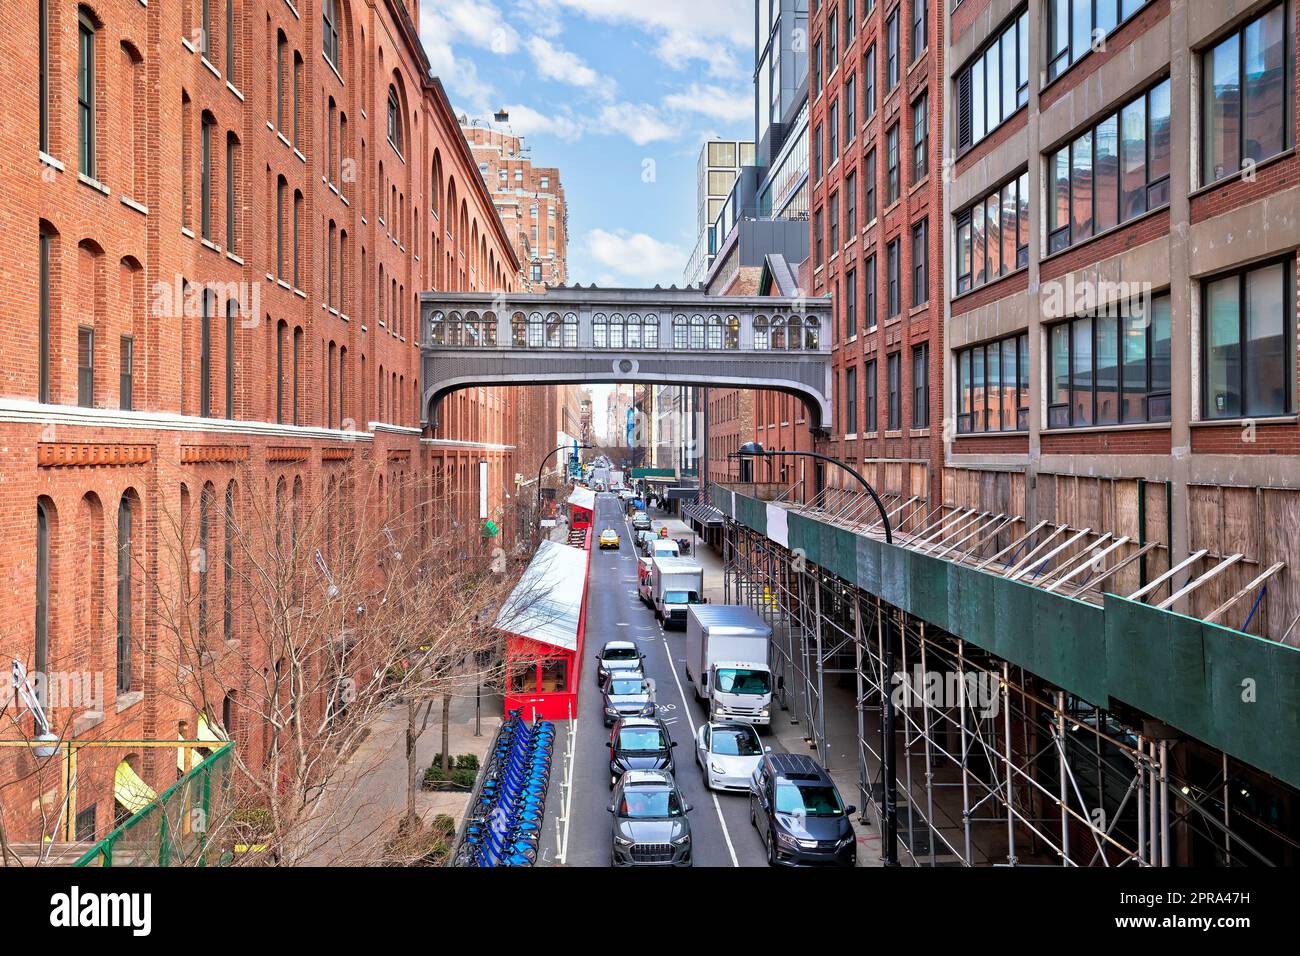 New York City W15th street Chelsea Market view, Meatpacking district NYC Stock Photo